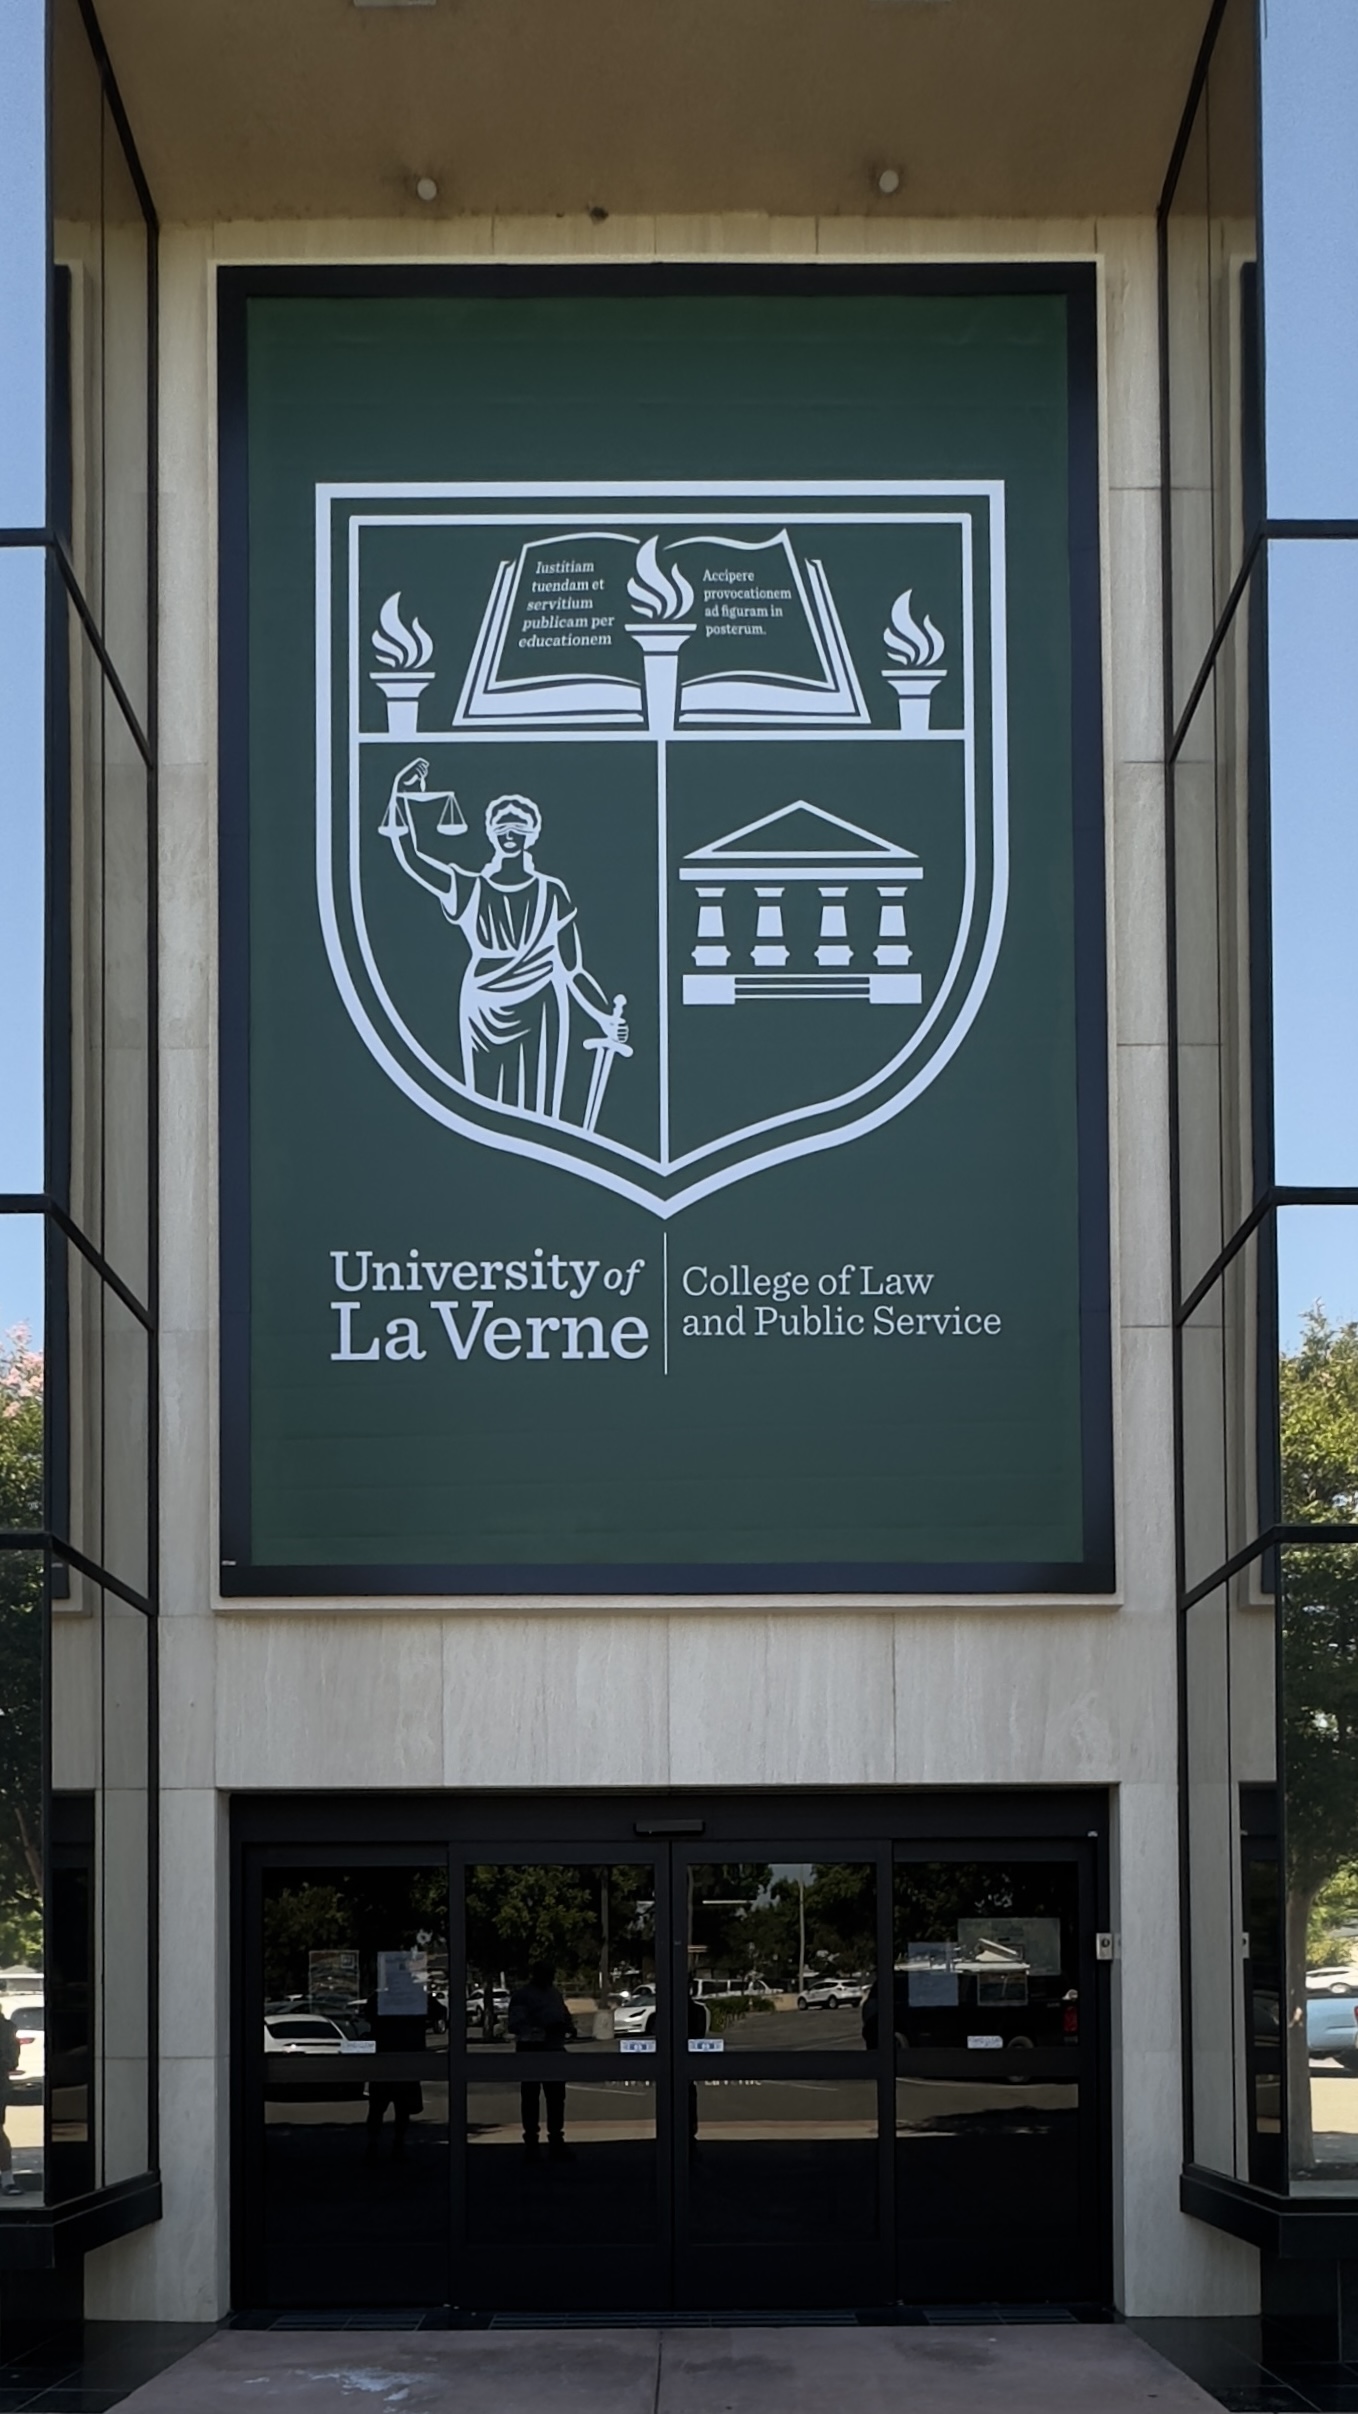 Lind BannerFrame Classic Banner Installation Kit installed at College of Law & Public Service, La Verne University, Ontario, California